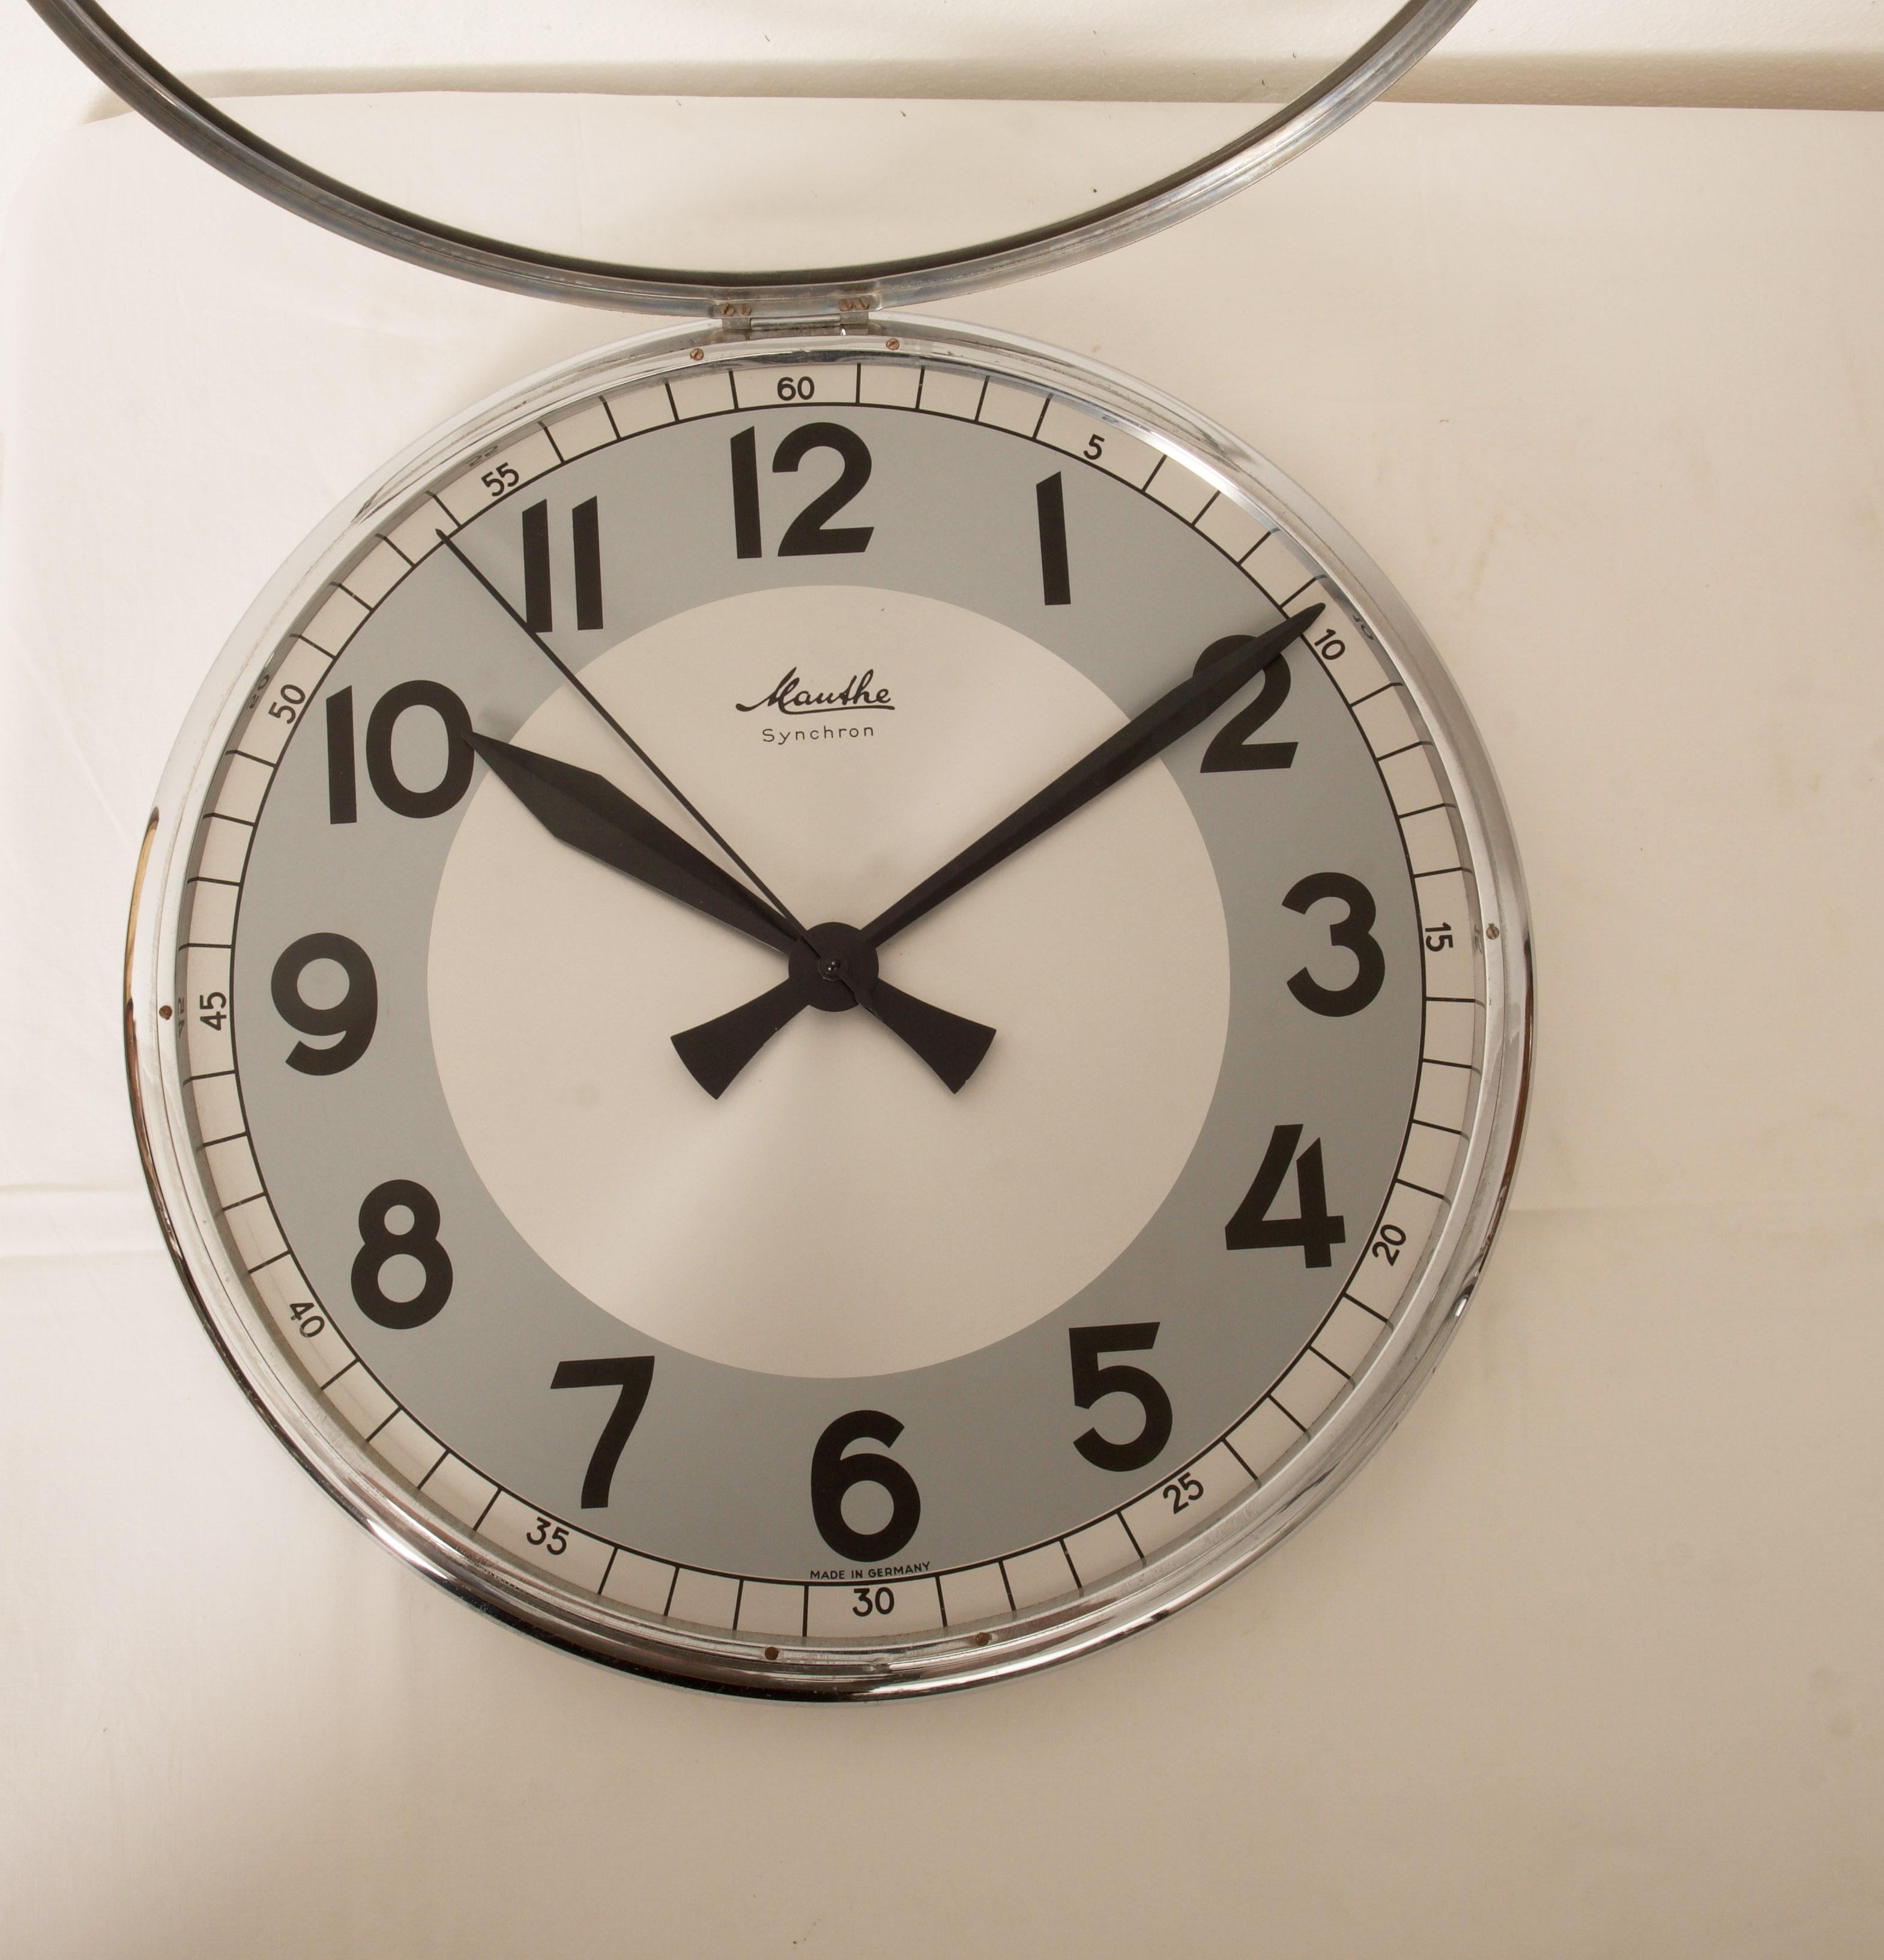 Austrian Mauthe Synchron Factory or Workshop Wall Clock For Sale